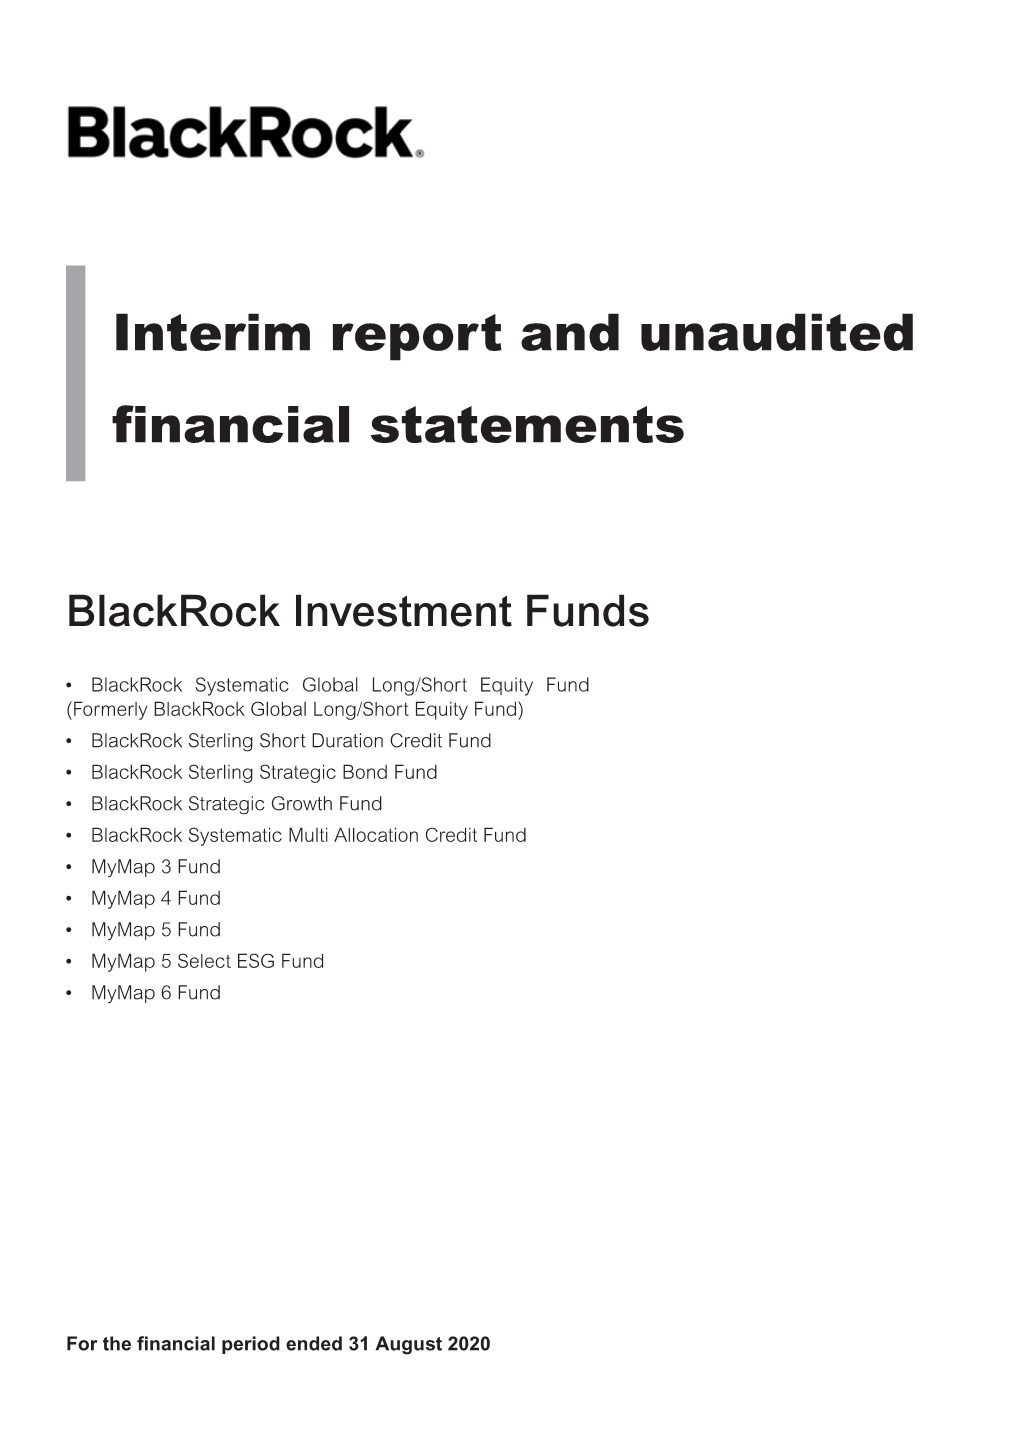 Interim Report and Unaudited Financial Statements